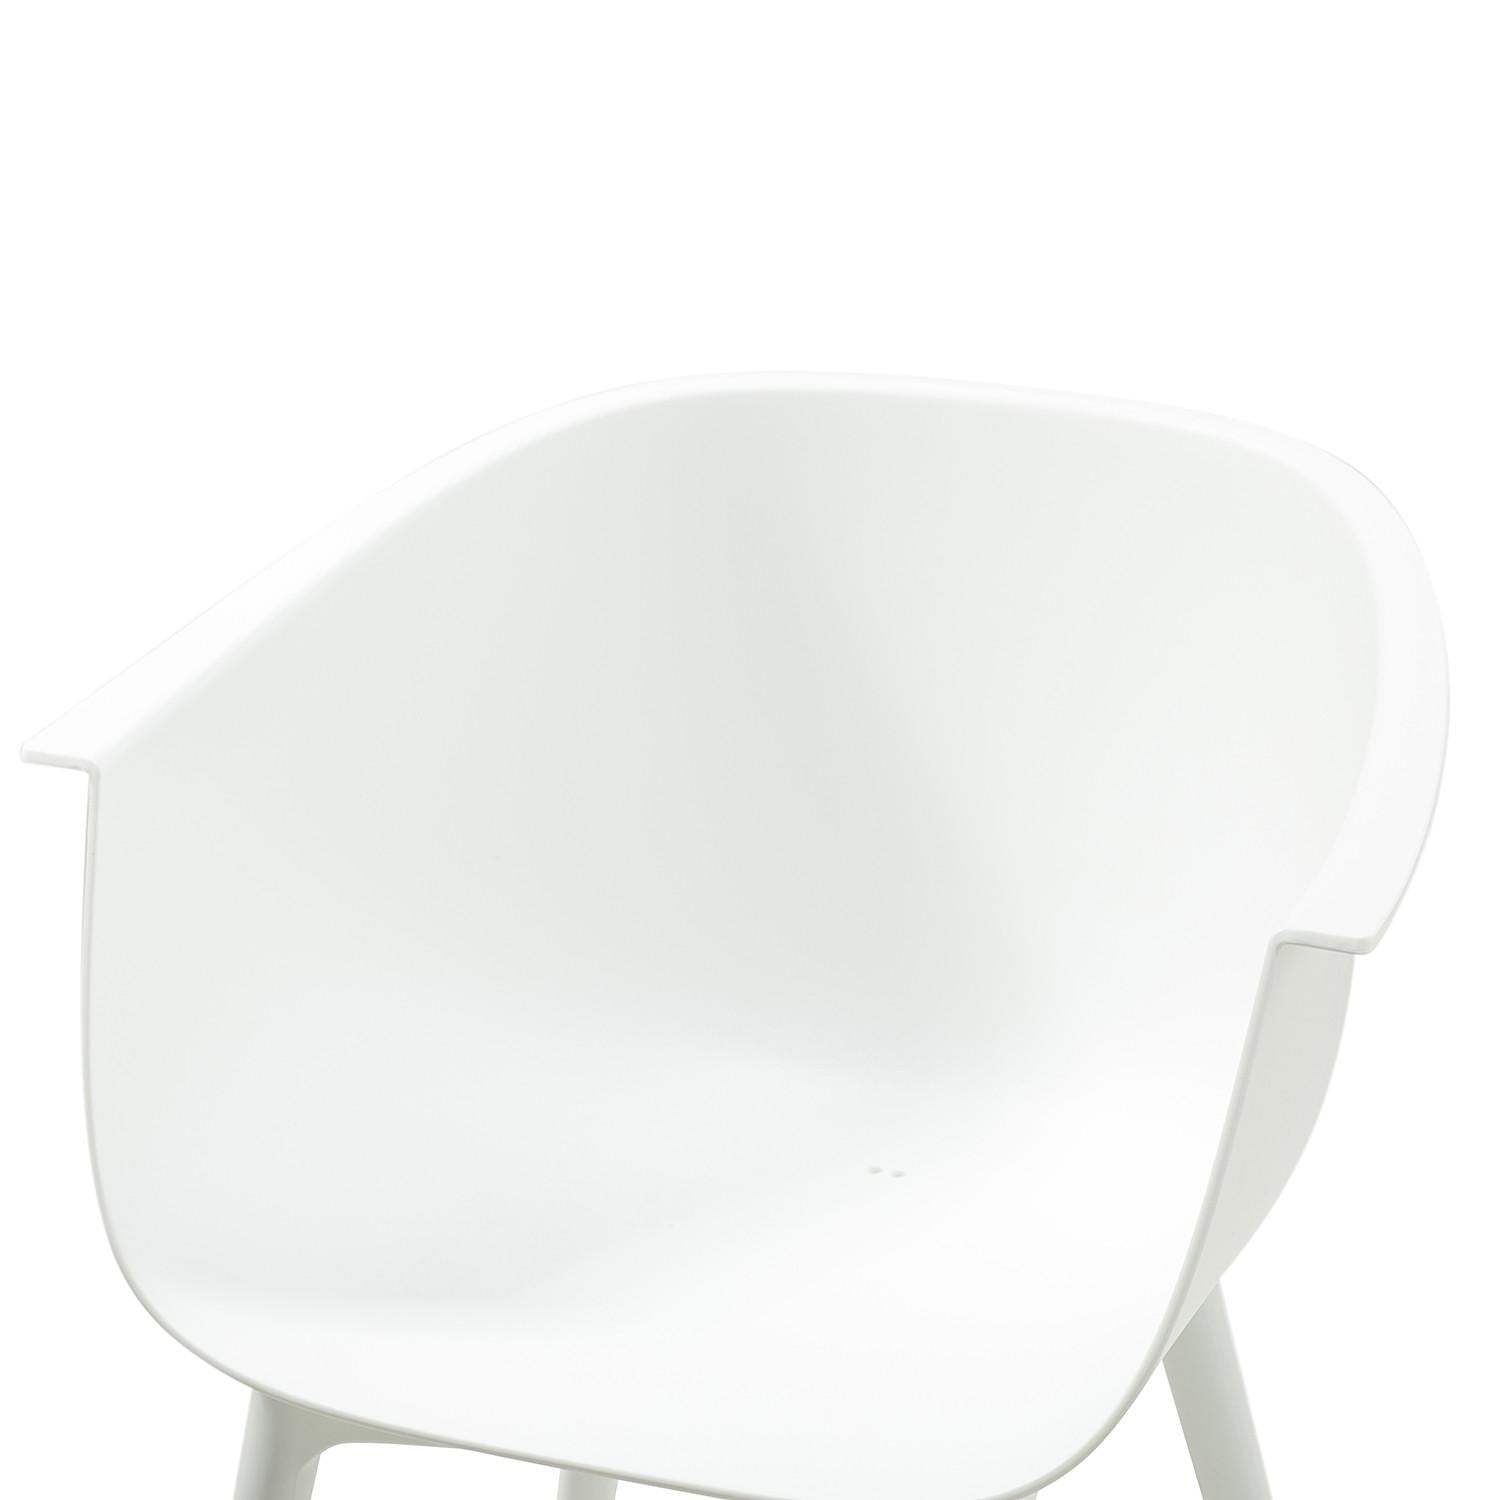 Solid White Contempo Outdoor Chairs and Table Set